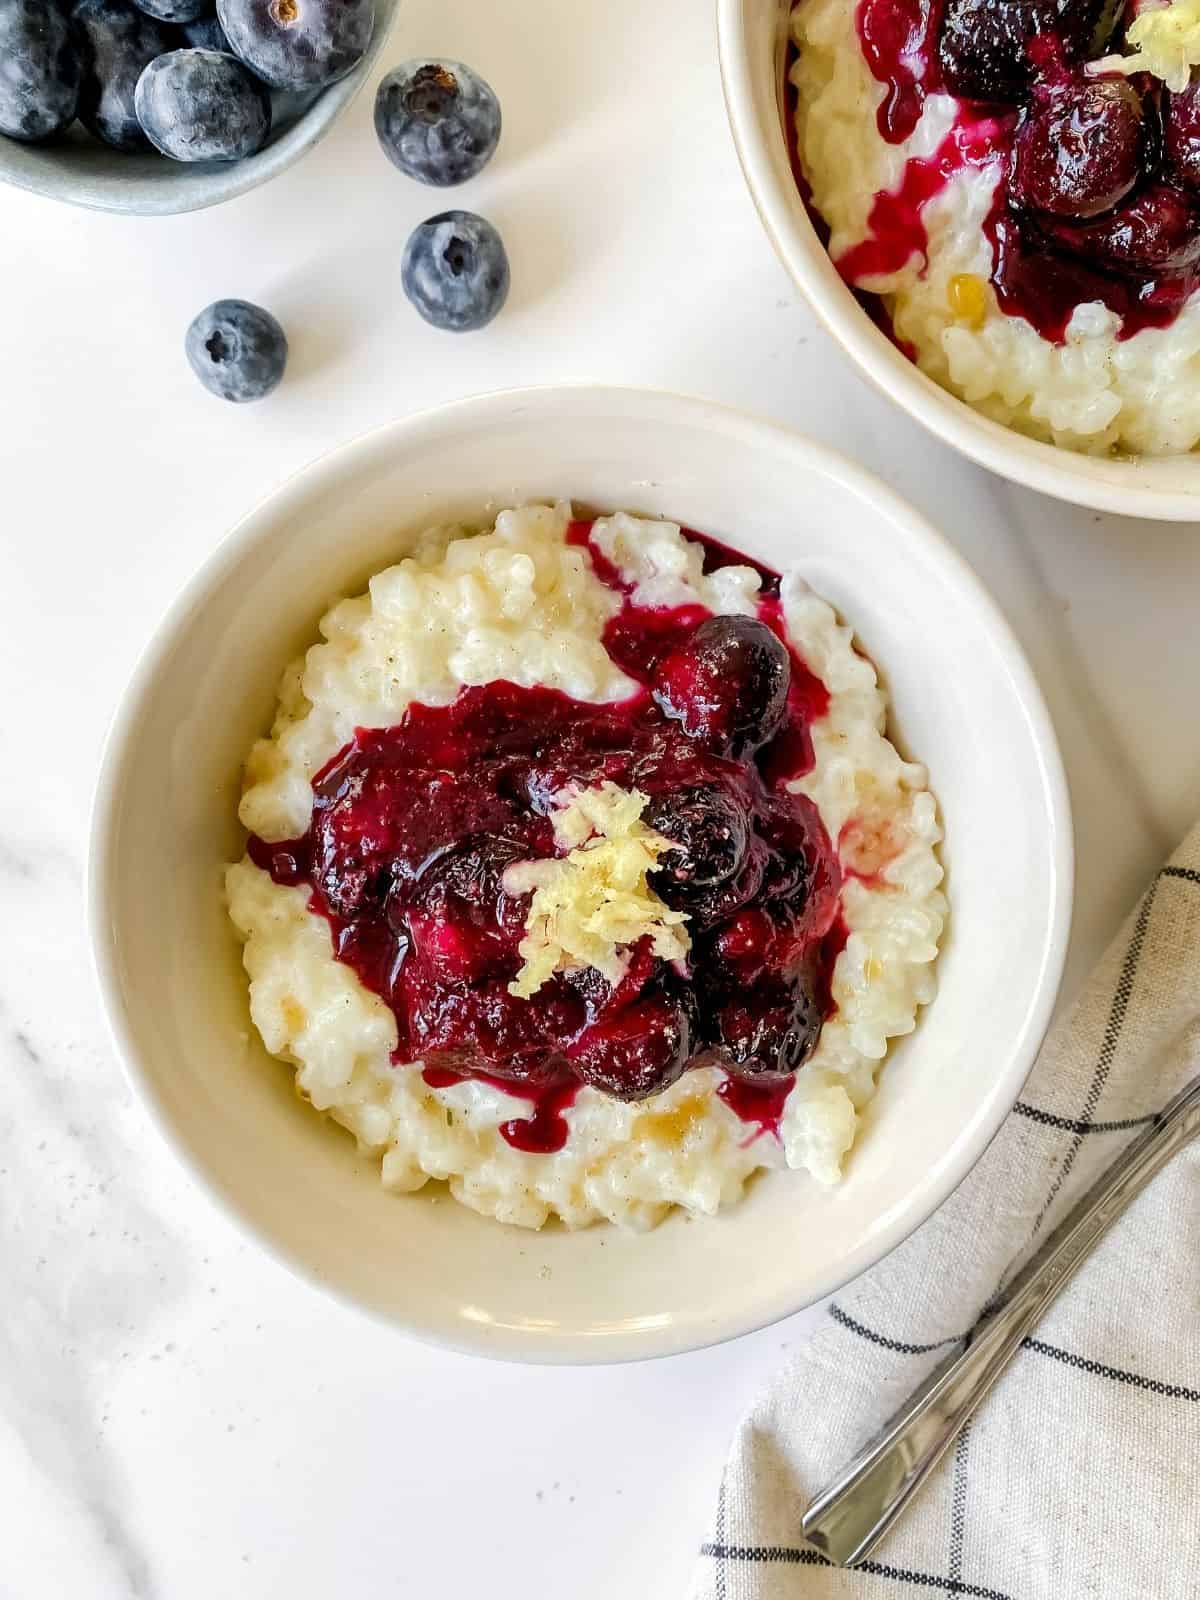 blueberry rice pudding in two white bowls on a checked cloth.